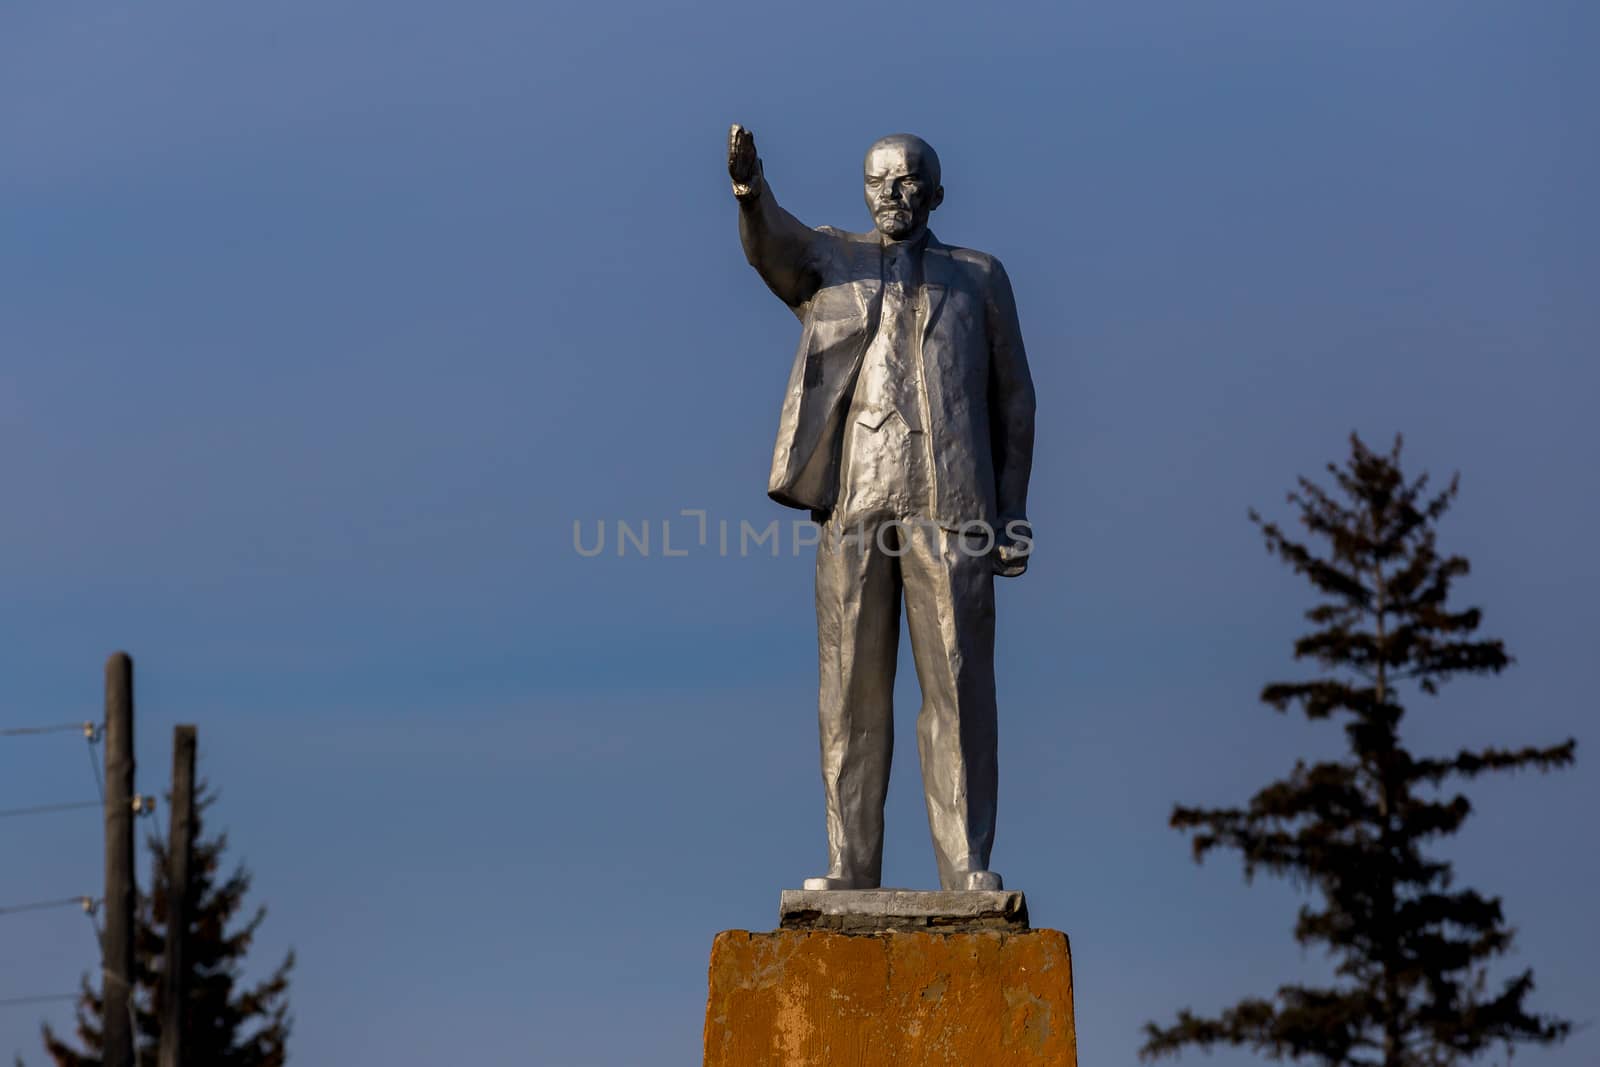 Monument to Vladimir Lenin against the background of blue sky in Russia.